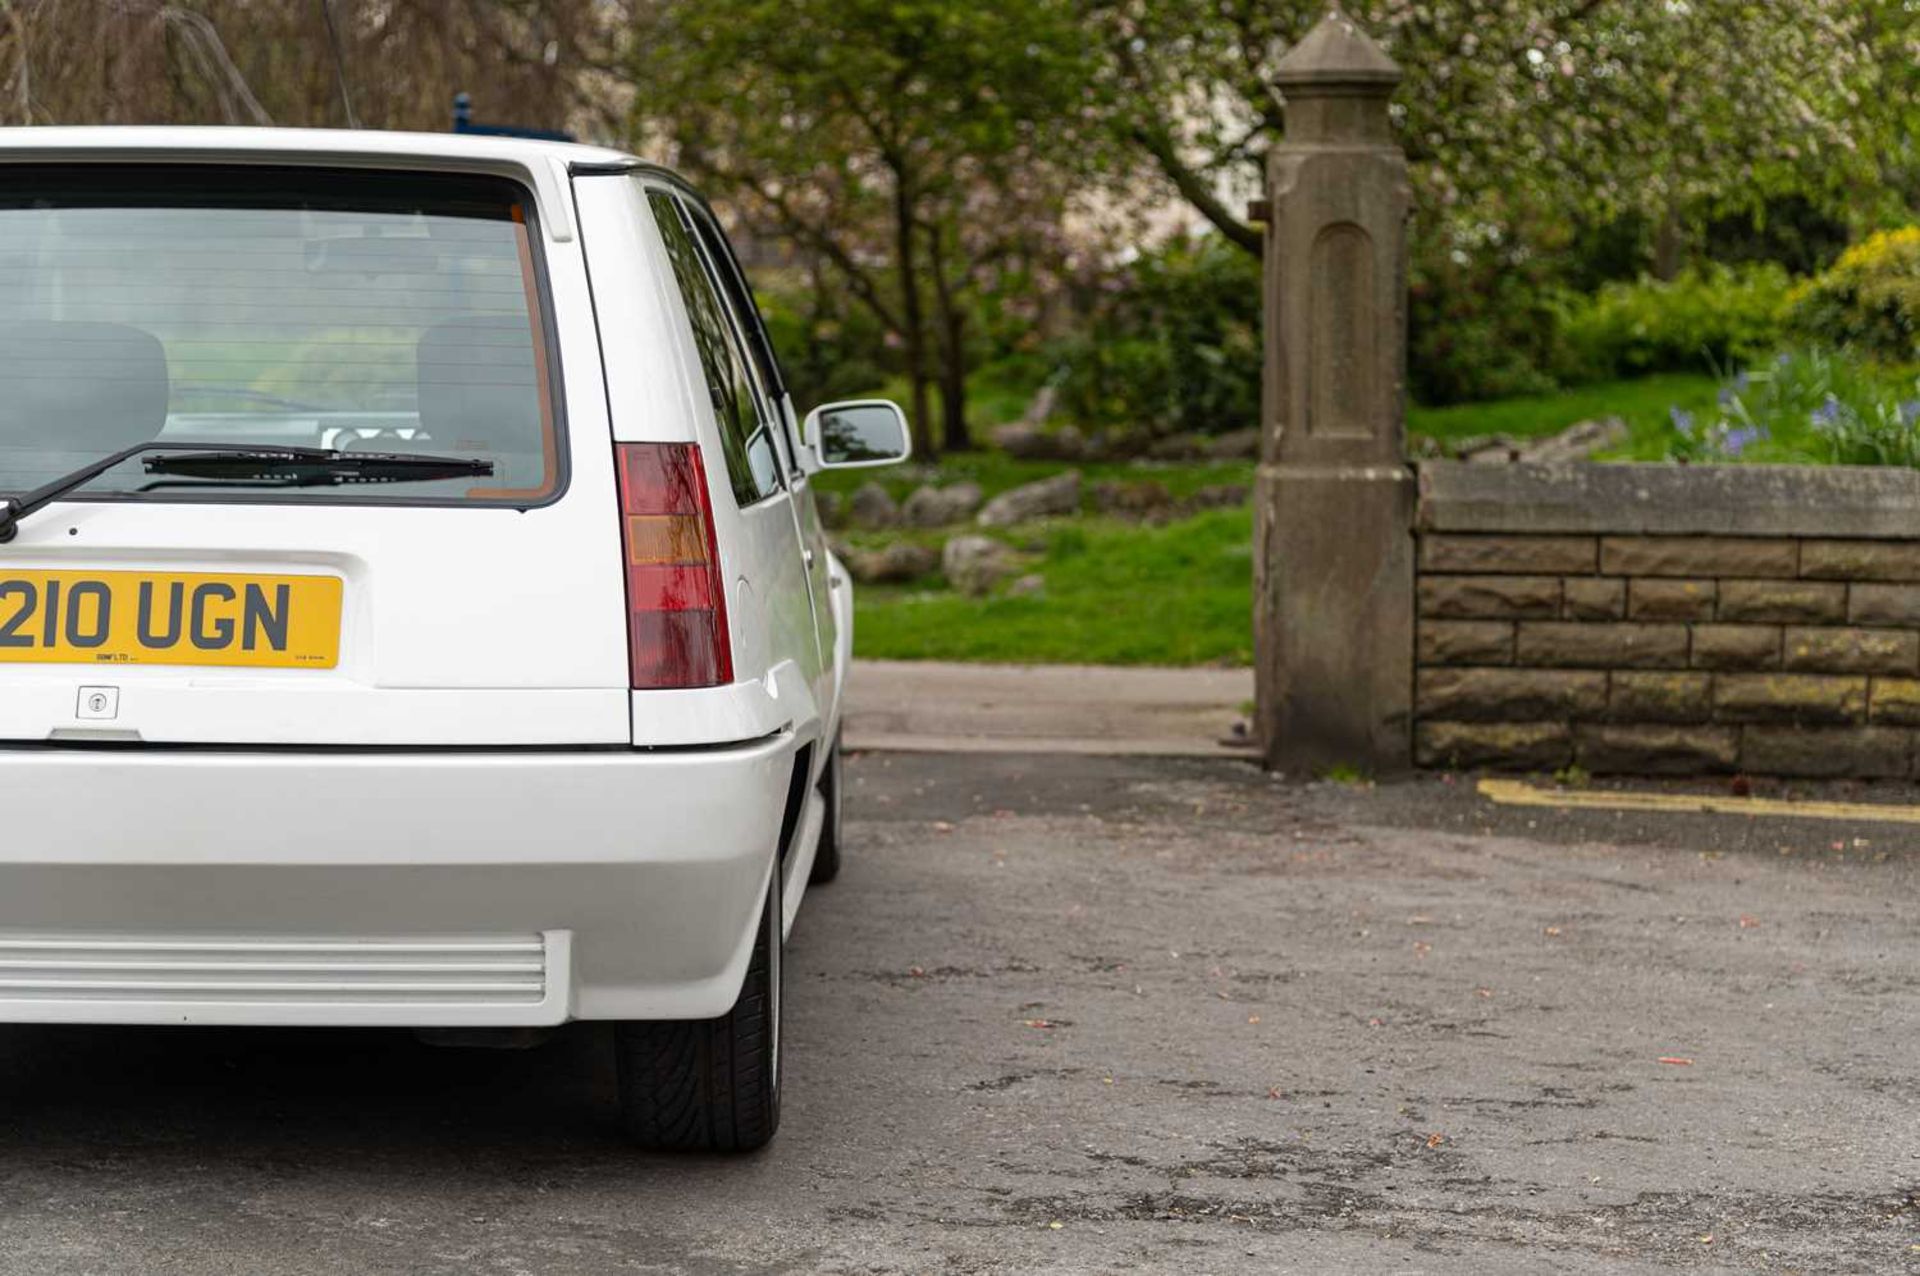 1990 Renault 5 GT Turbo - Image 17 of 79